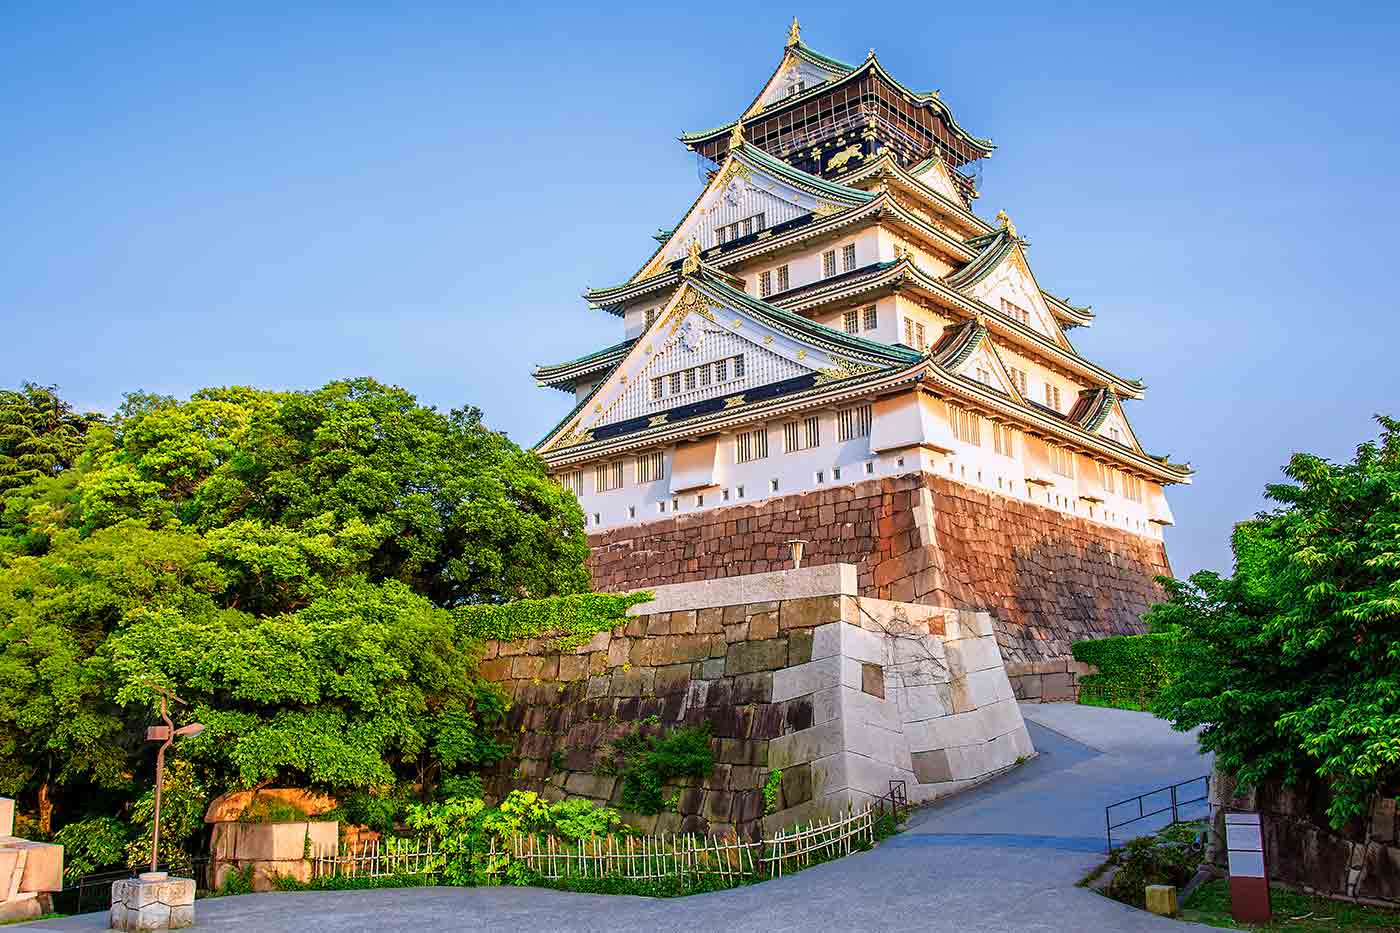 Things to Do and See in Osaka